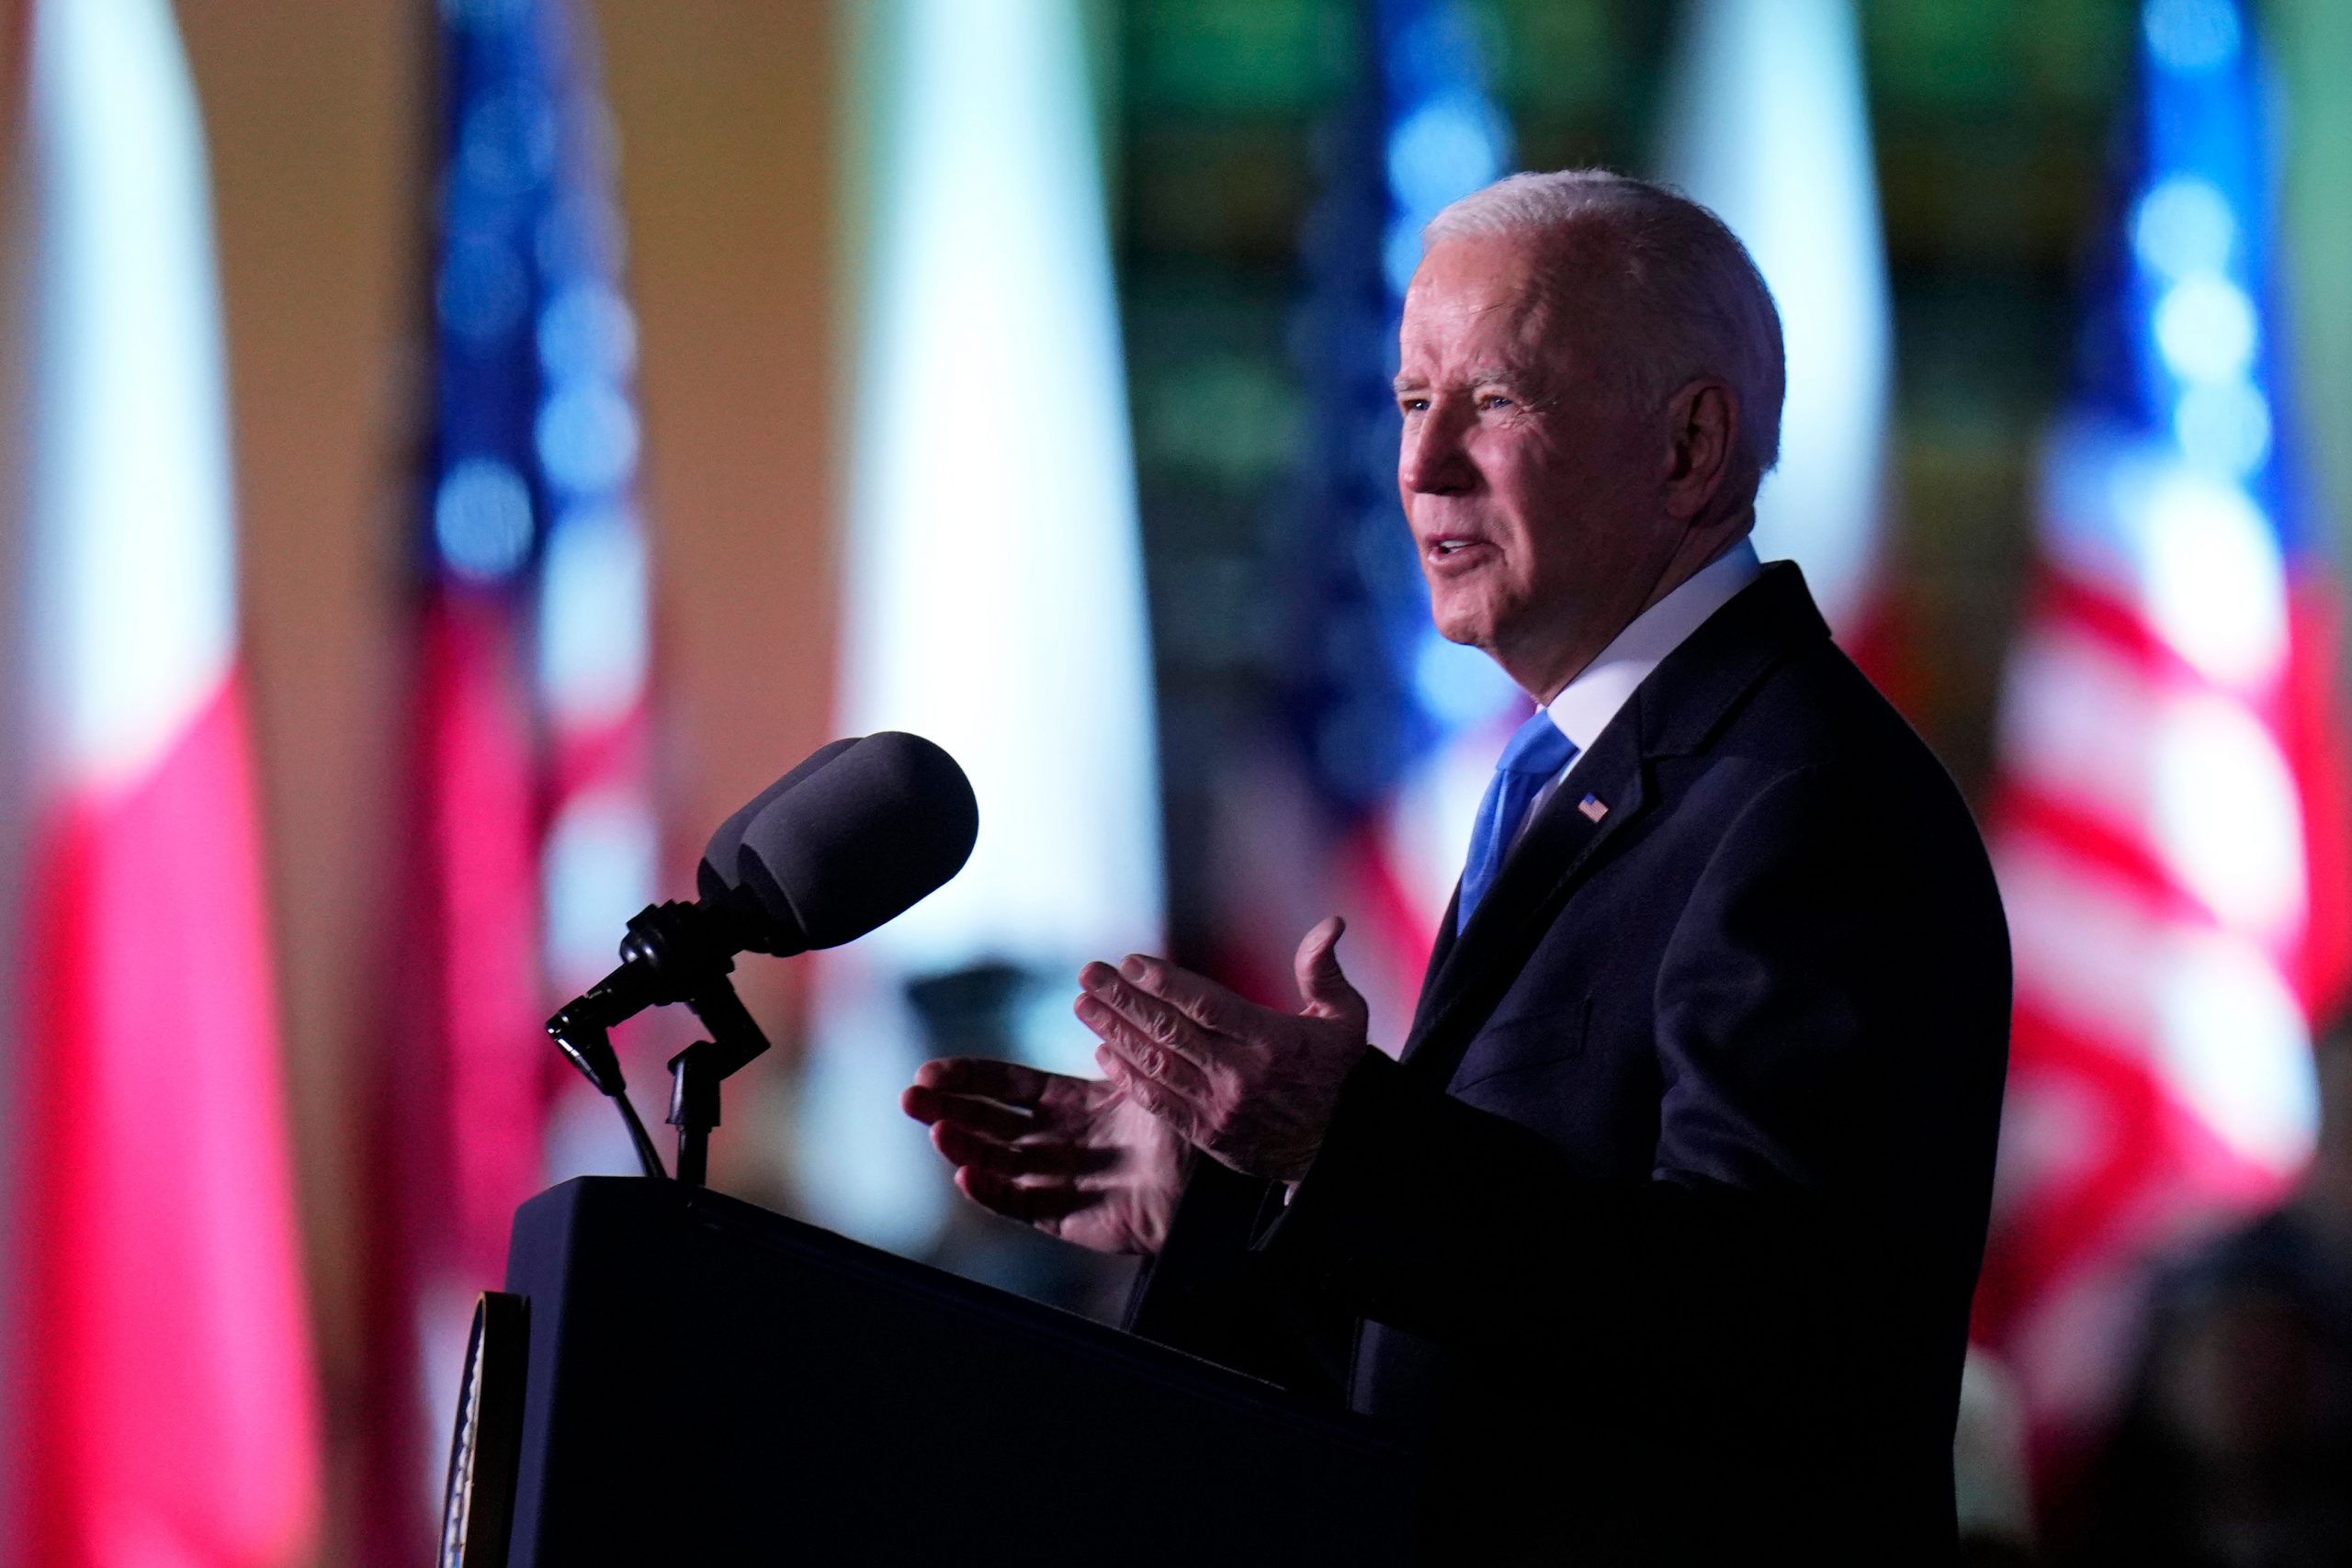 Roe v Wade: President Biden urges Congress to protect abortion rights in US